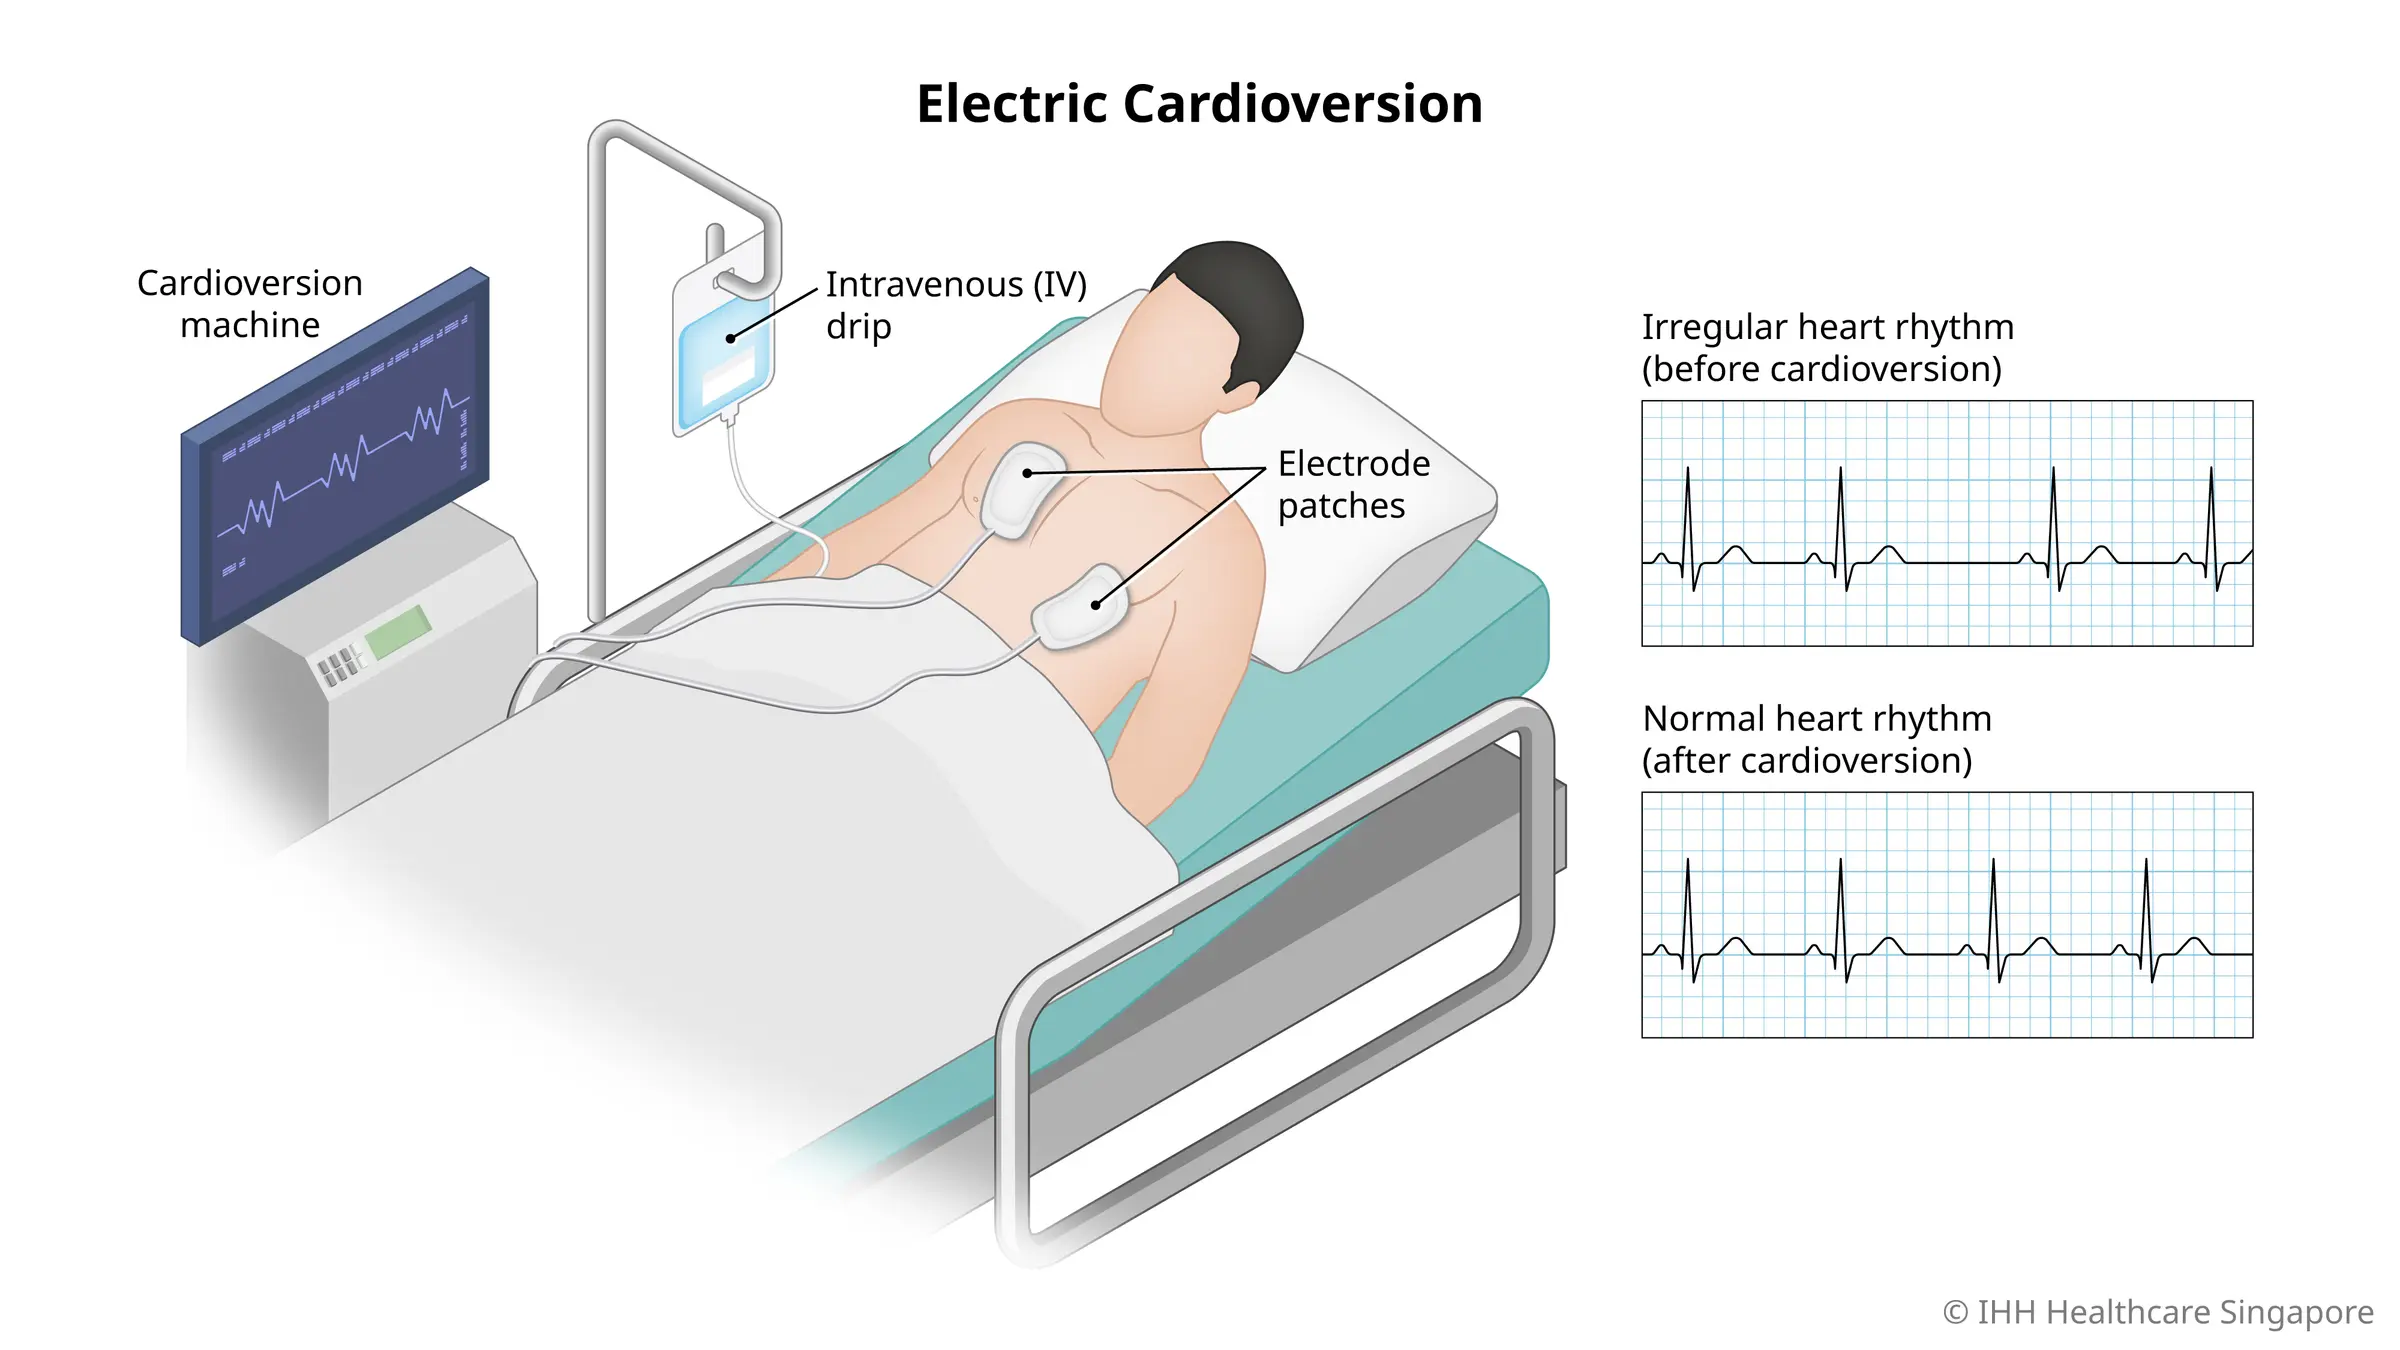 Electric cardioversion uses electrode patches to deliver an electrical shock to the heart to correct irregular heart rhythm. 